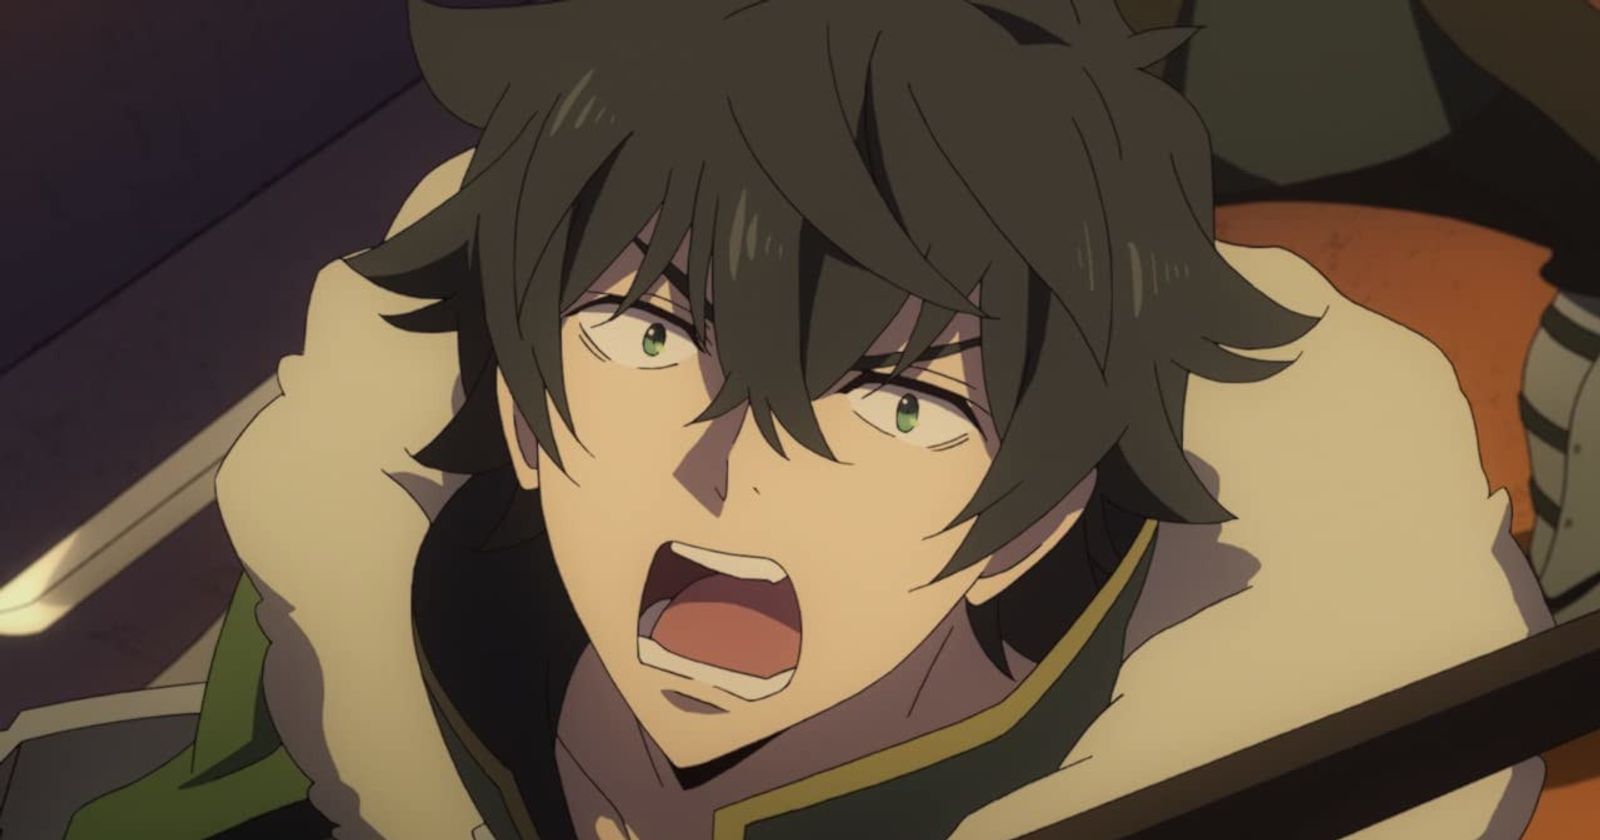 The Rising of the Shield Hero RERISE - Games